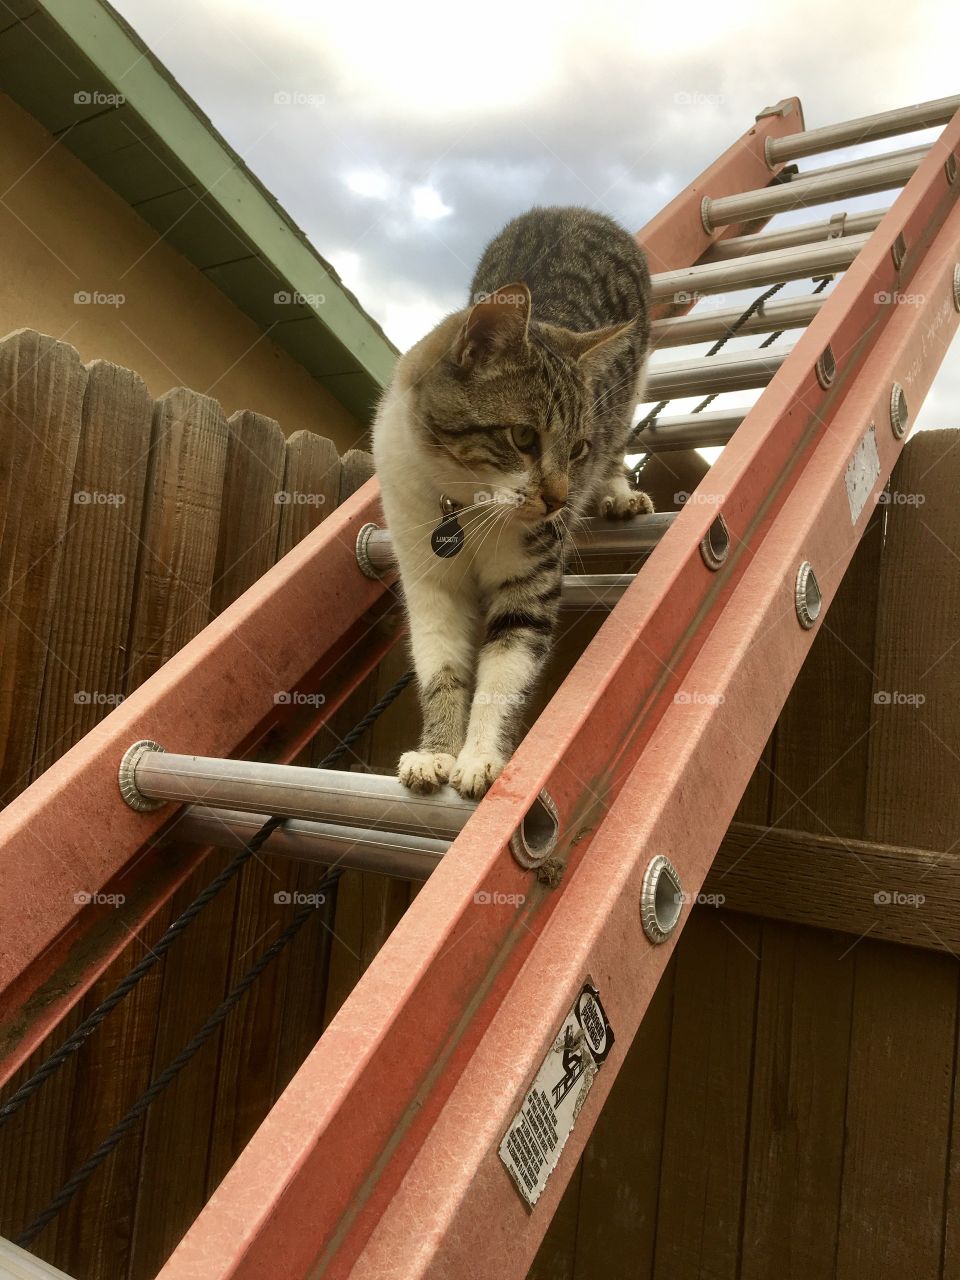 Kitty on a ladder 